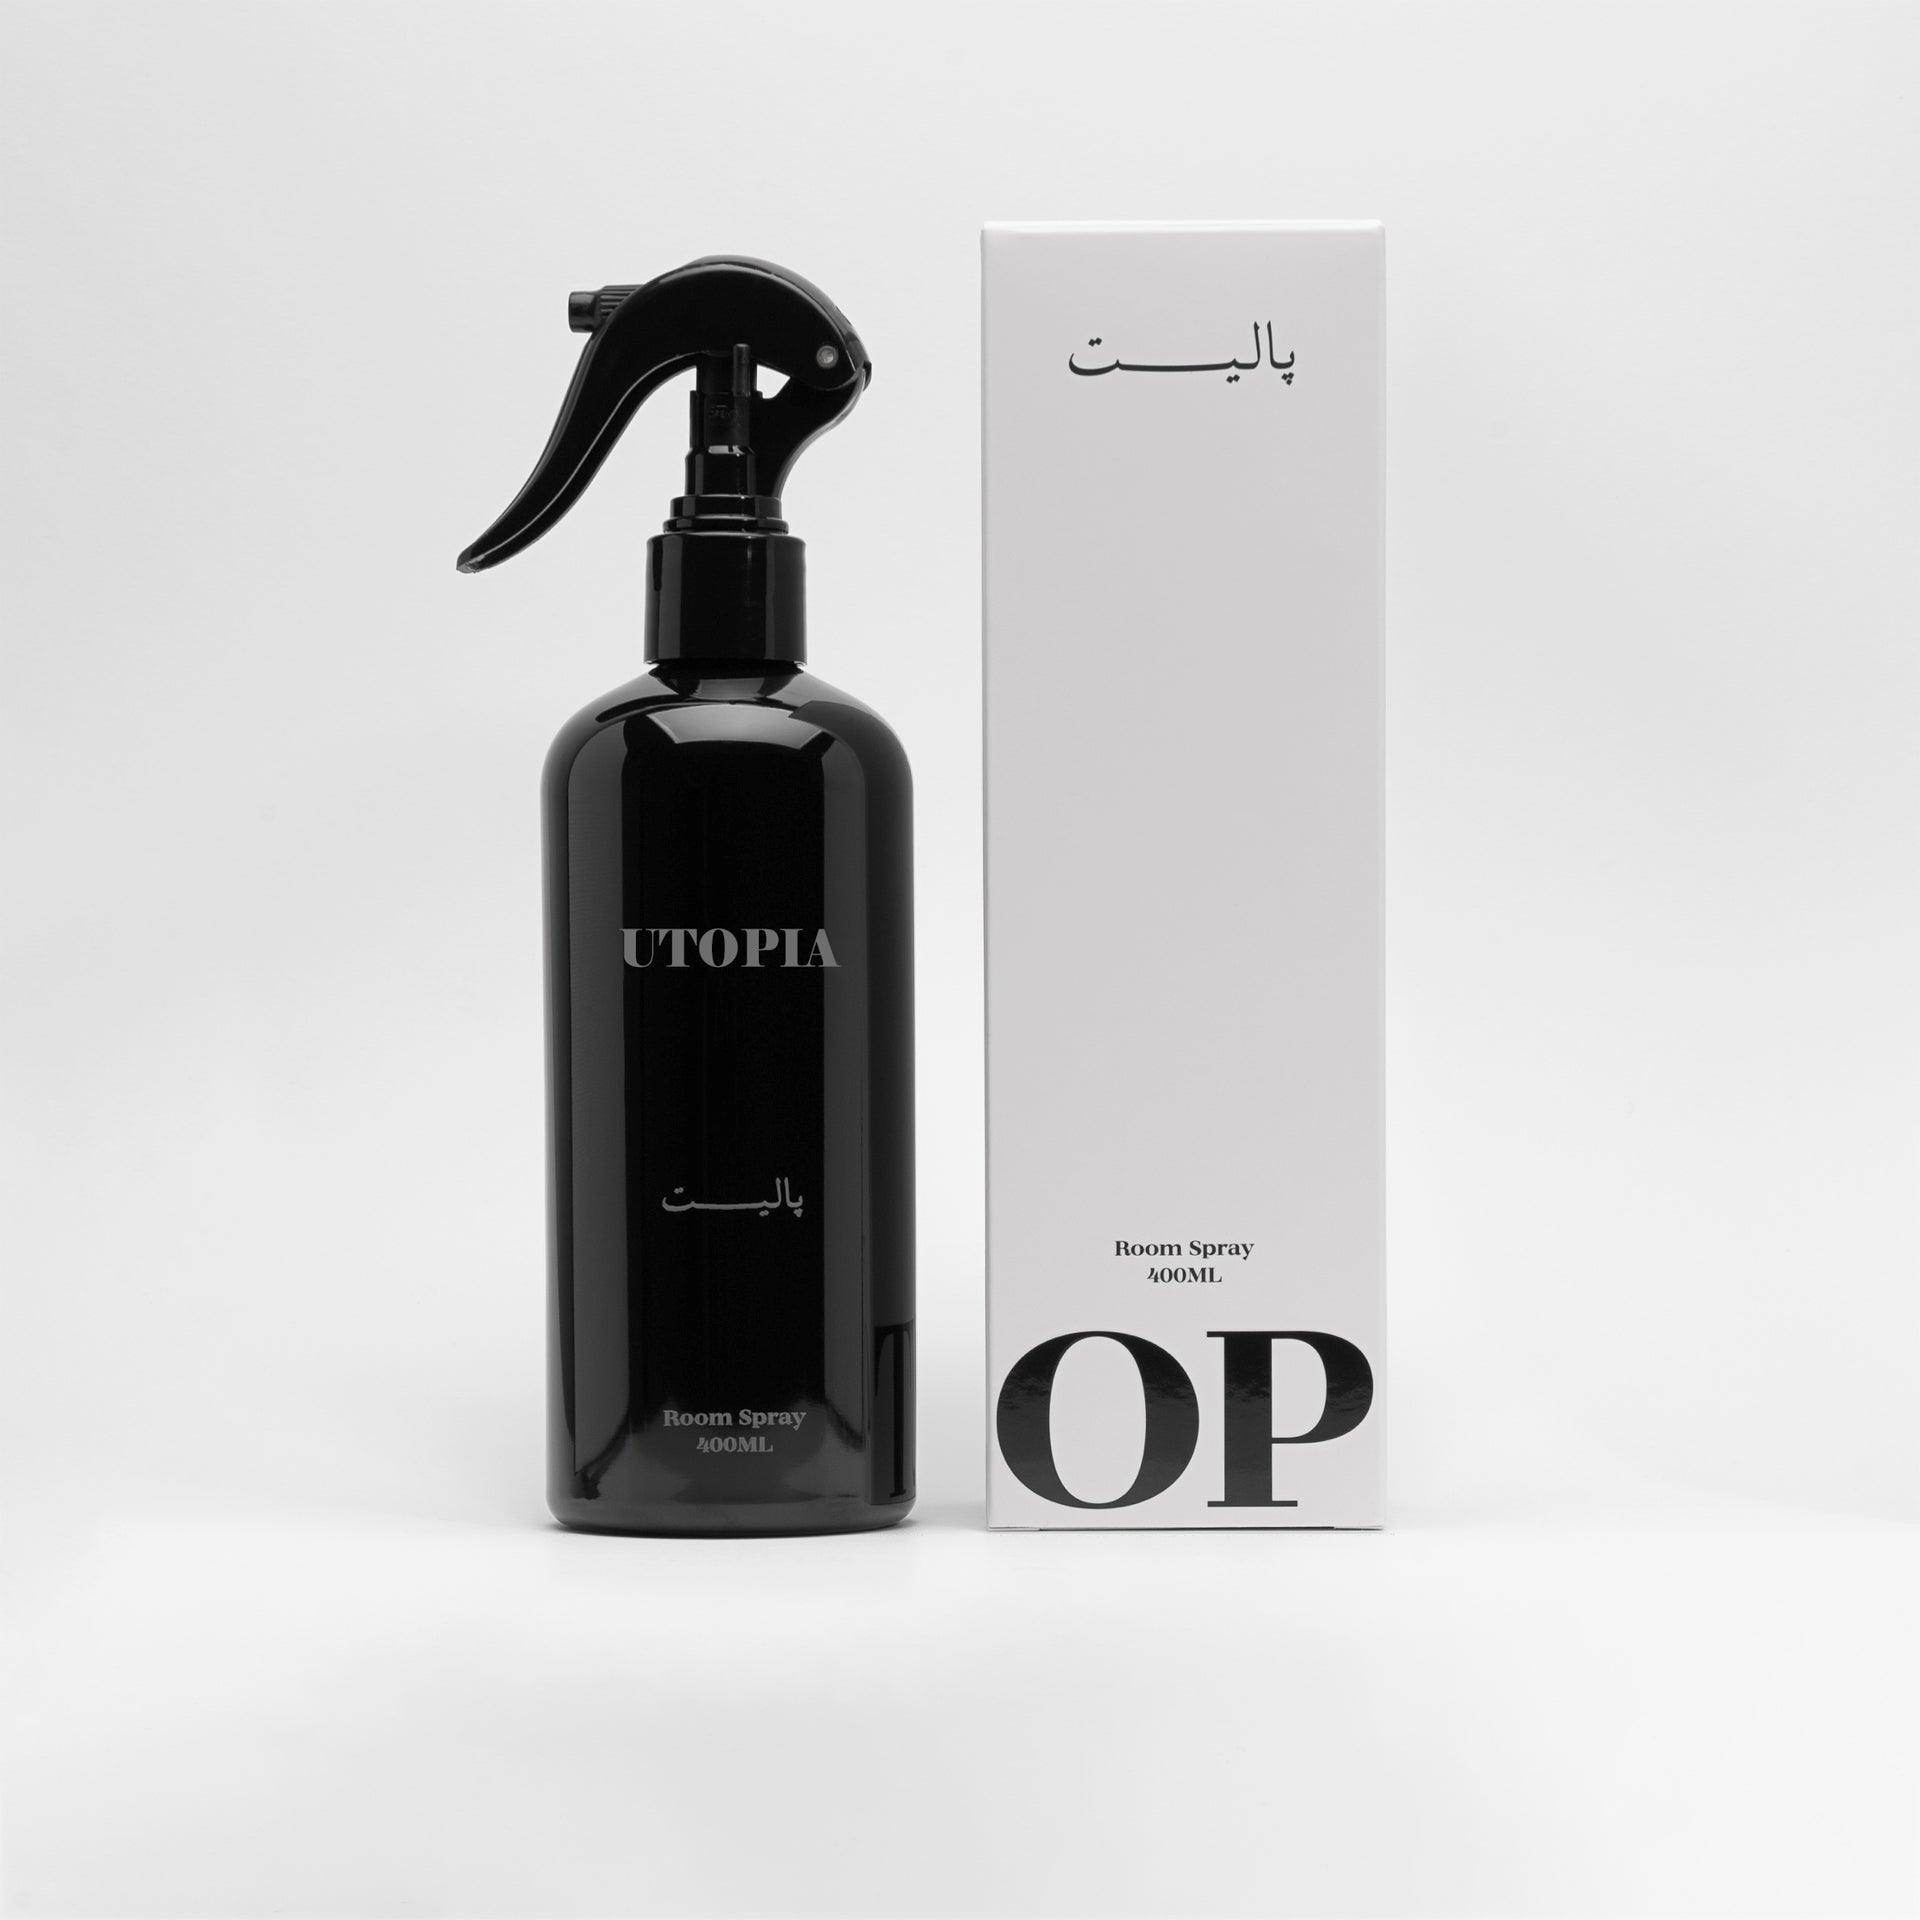 Utopia Room Spray By Palette Perfumes - WECRE8